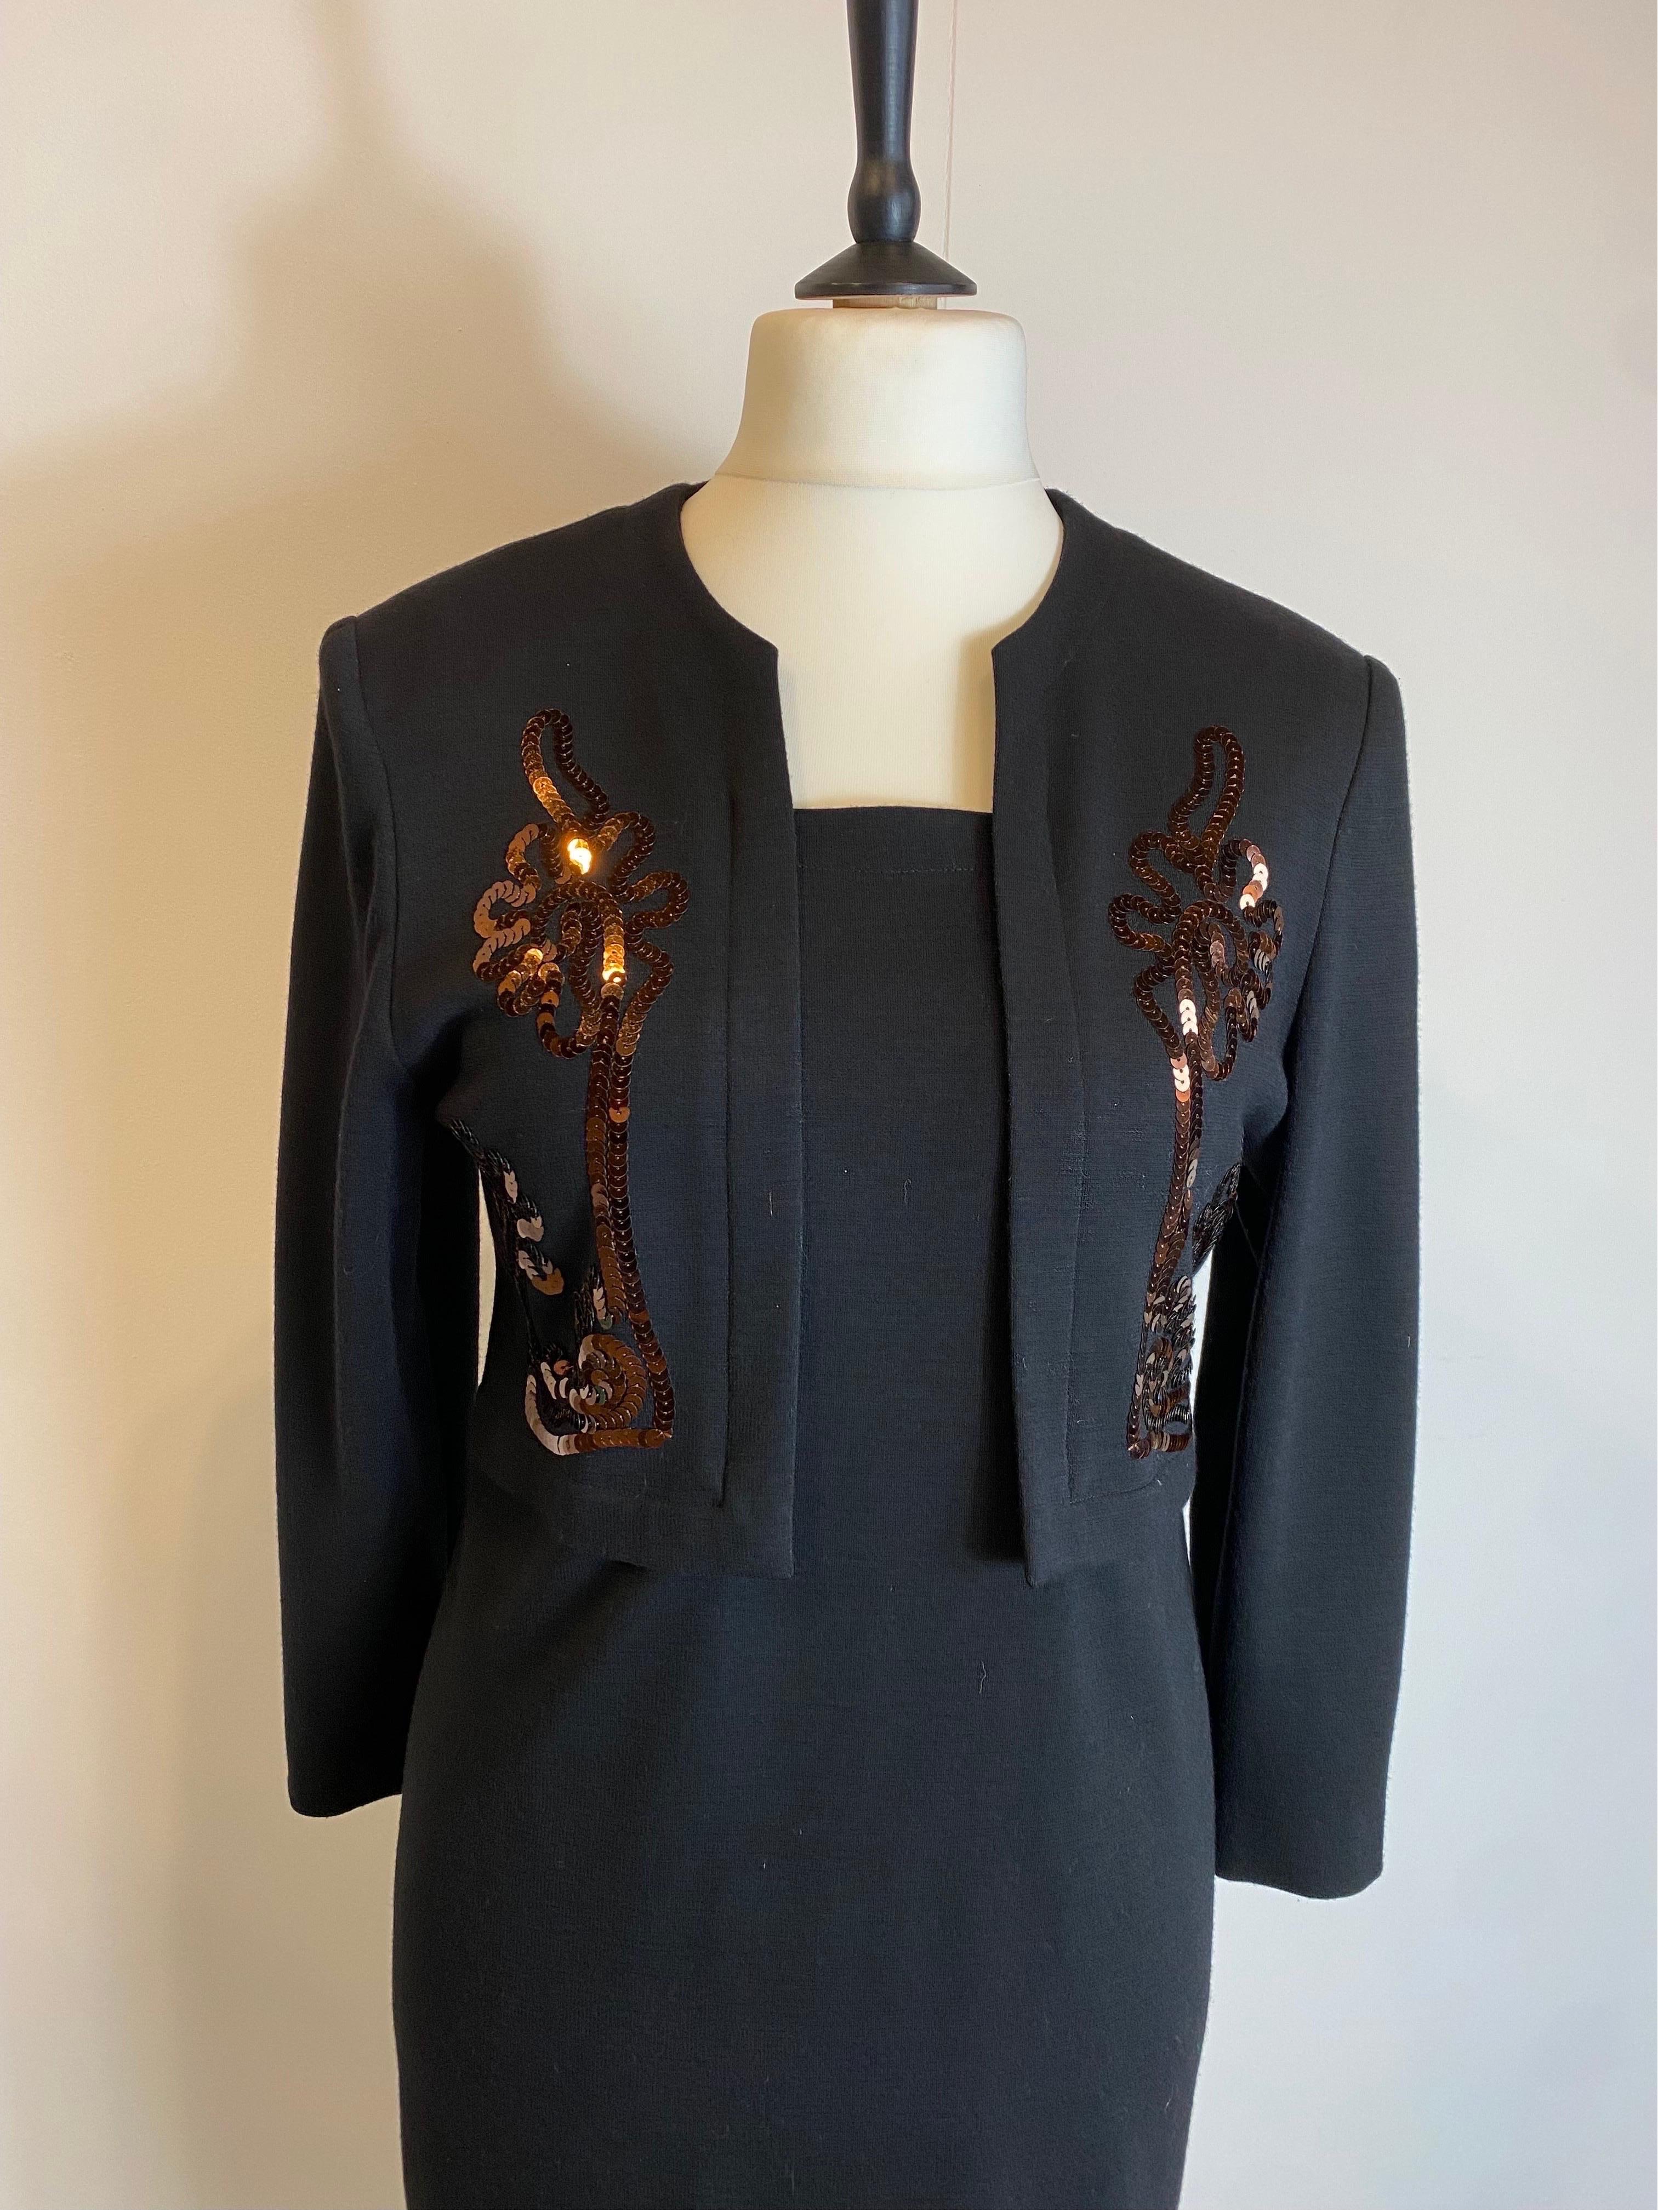 Pierre Cardin Vintage dress.
Composition label missing but we think it is wool with bronze sequins.
Italian size 46.
Shoulders 46 cm
Bust 50 cm
Length 95 cm
Sleeve 55 cm
In good general condition, with signs of normal use and some pulled threads.